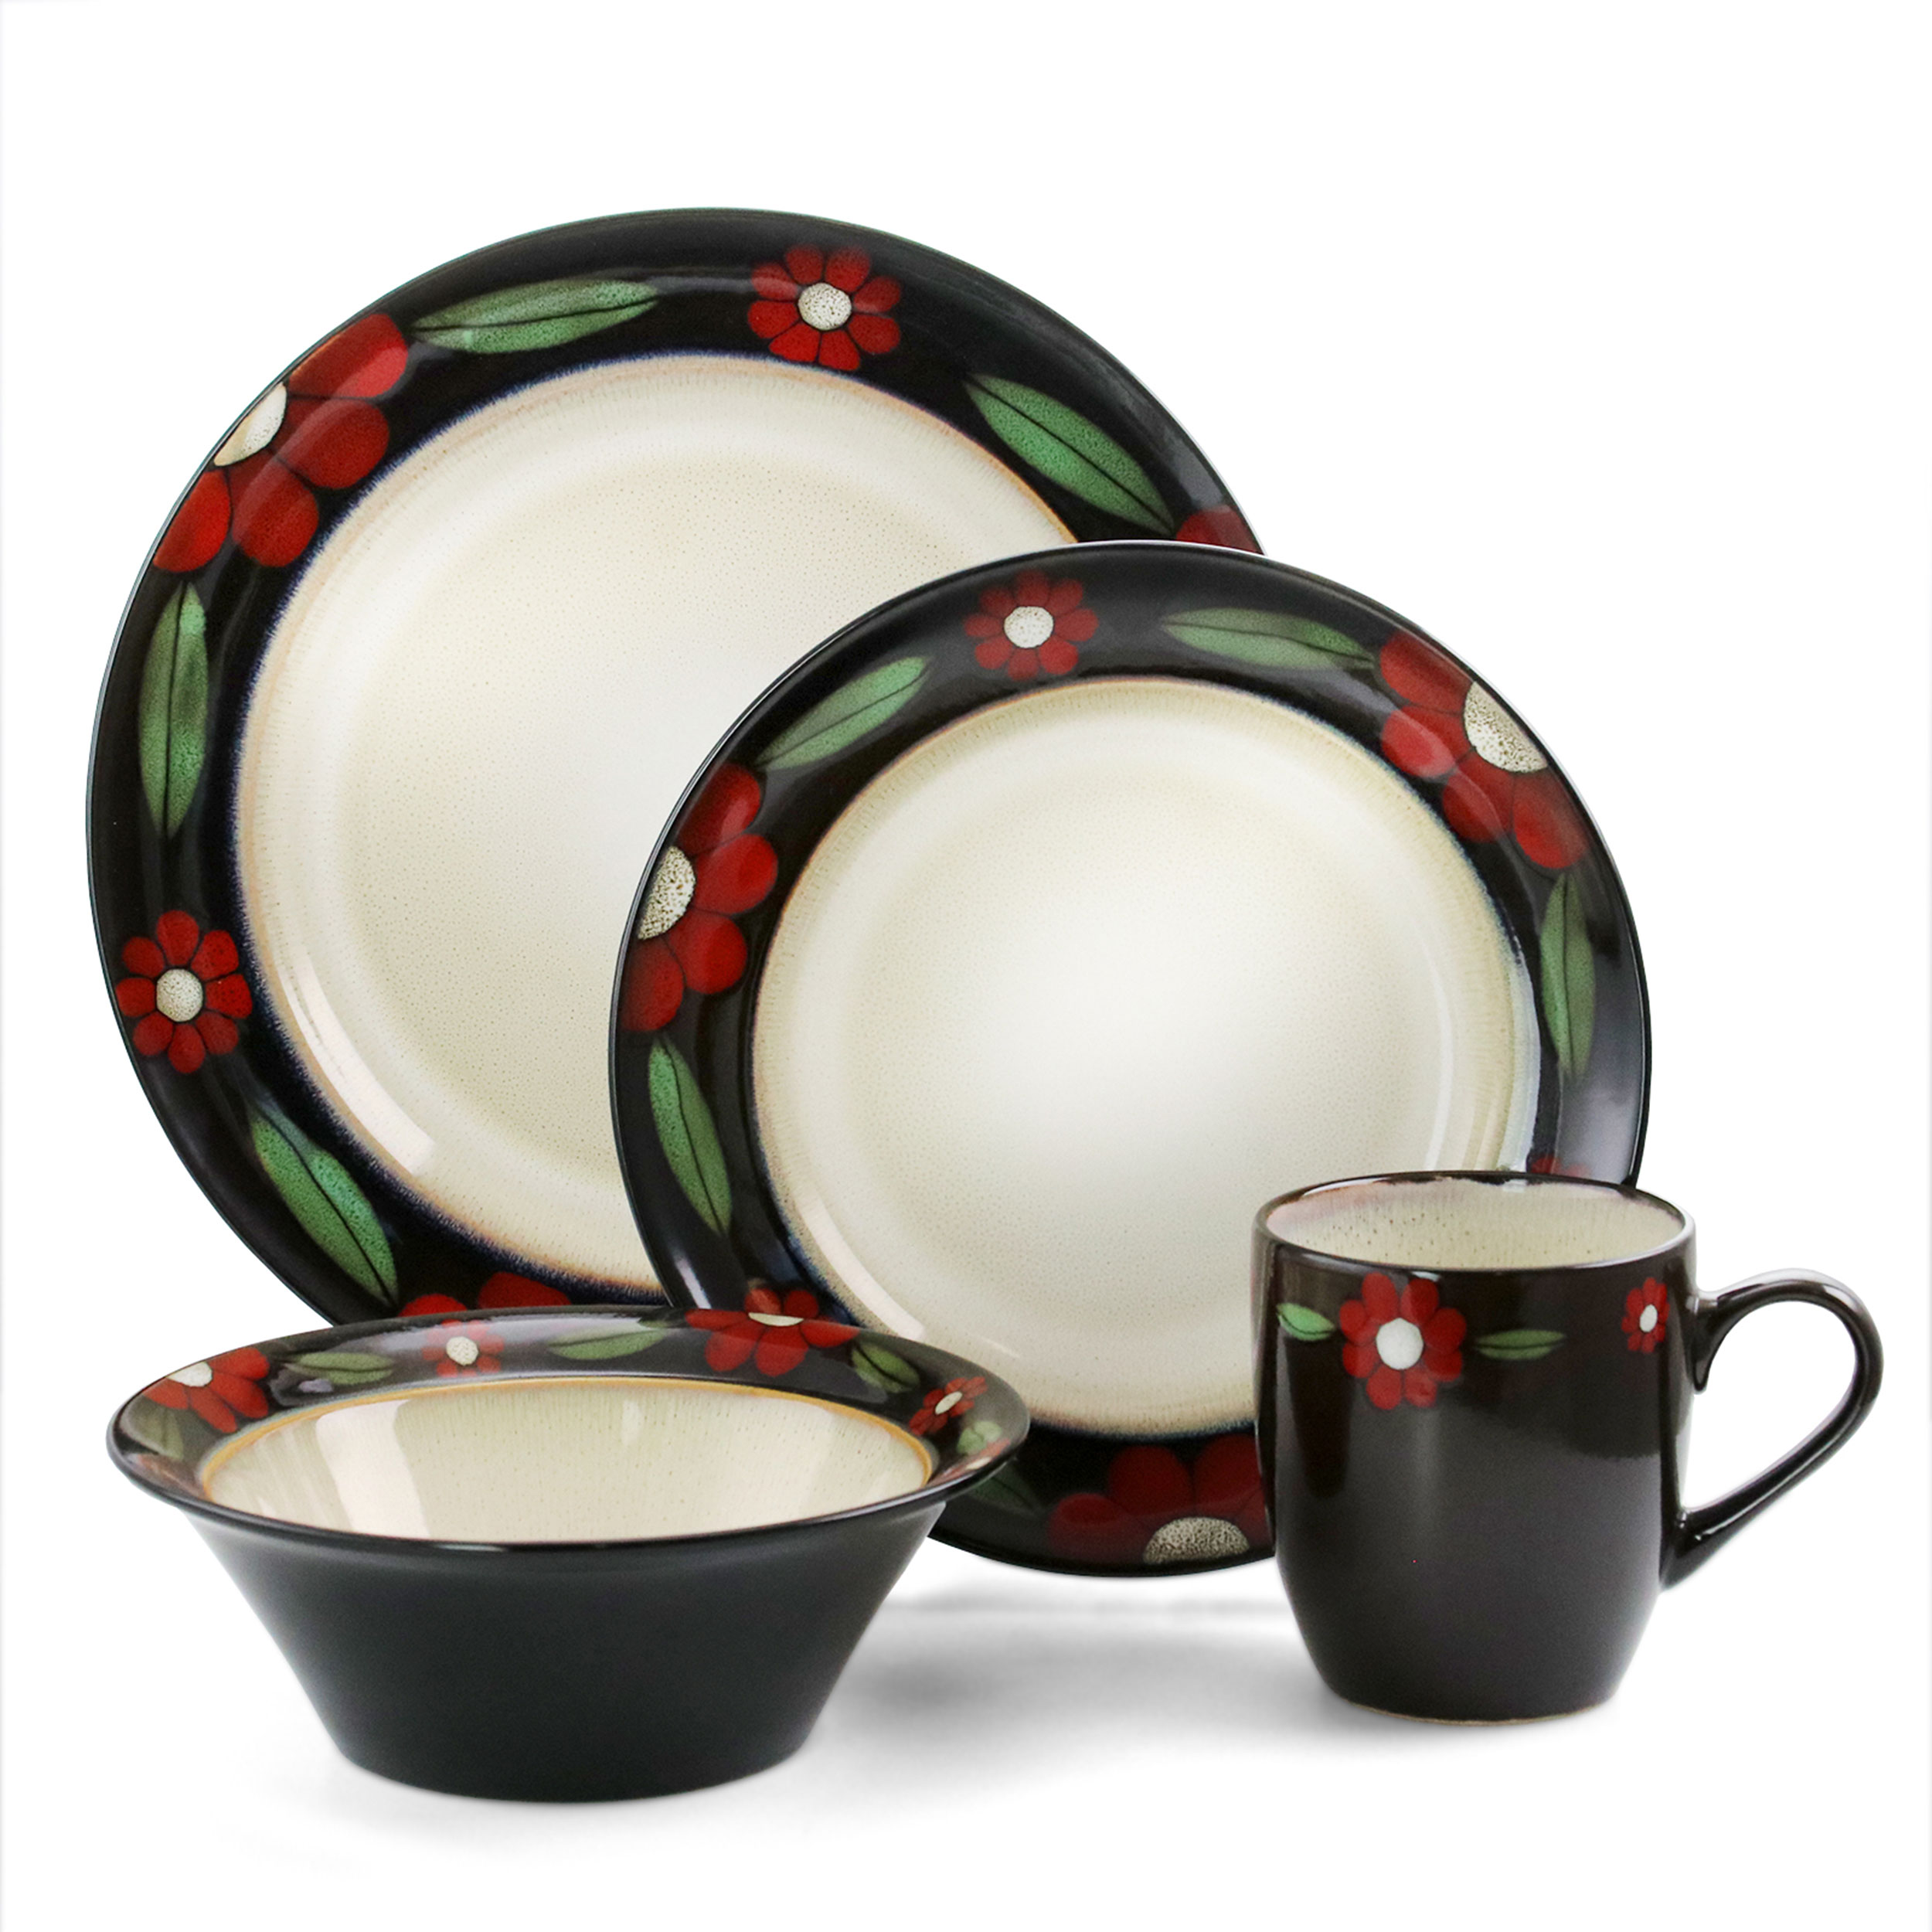 Elama Homestead 16 Piece Dinnerware Set in Brown and Floral - image 2 of 8